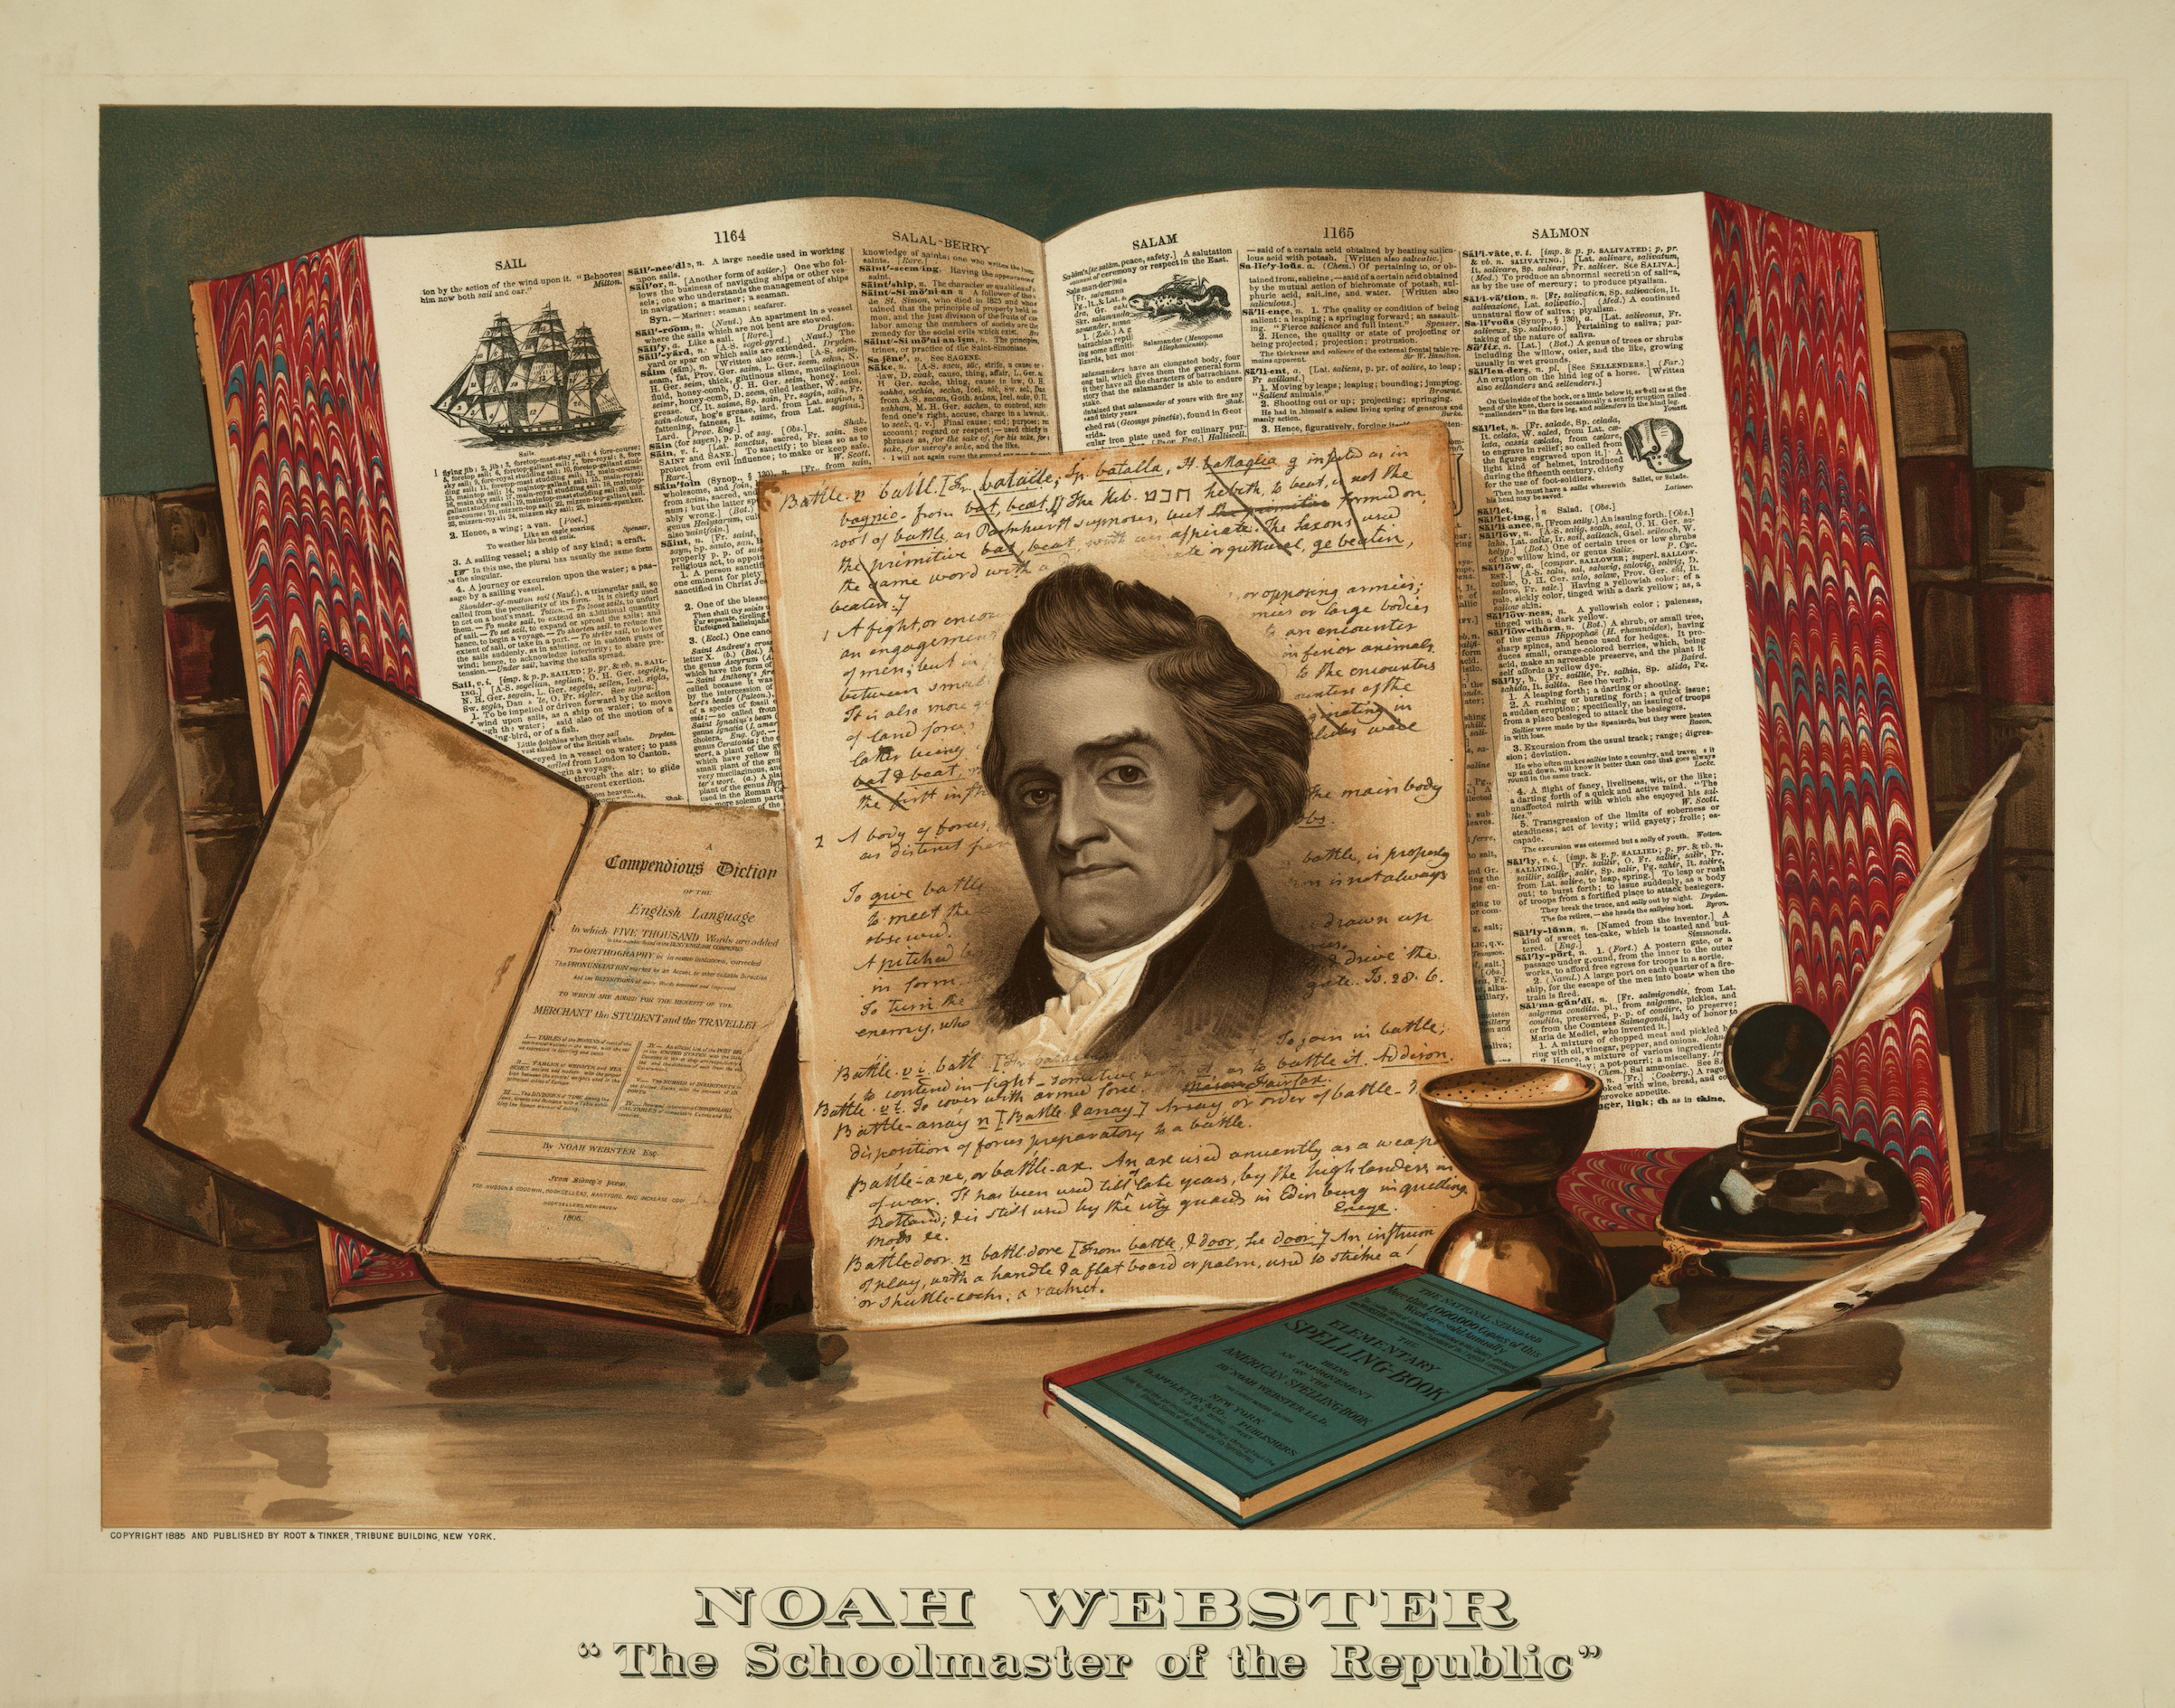 Noah Webster. Born 1758-died 1843. The schoolmaster of the republic; portrait shown in front of dictionary, books, inkwell & desk, 19th century. (Buyenlarge/Getty Images)